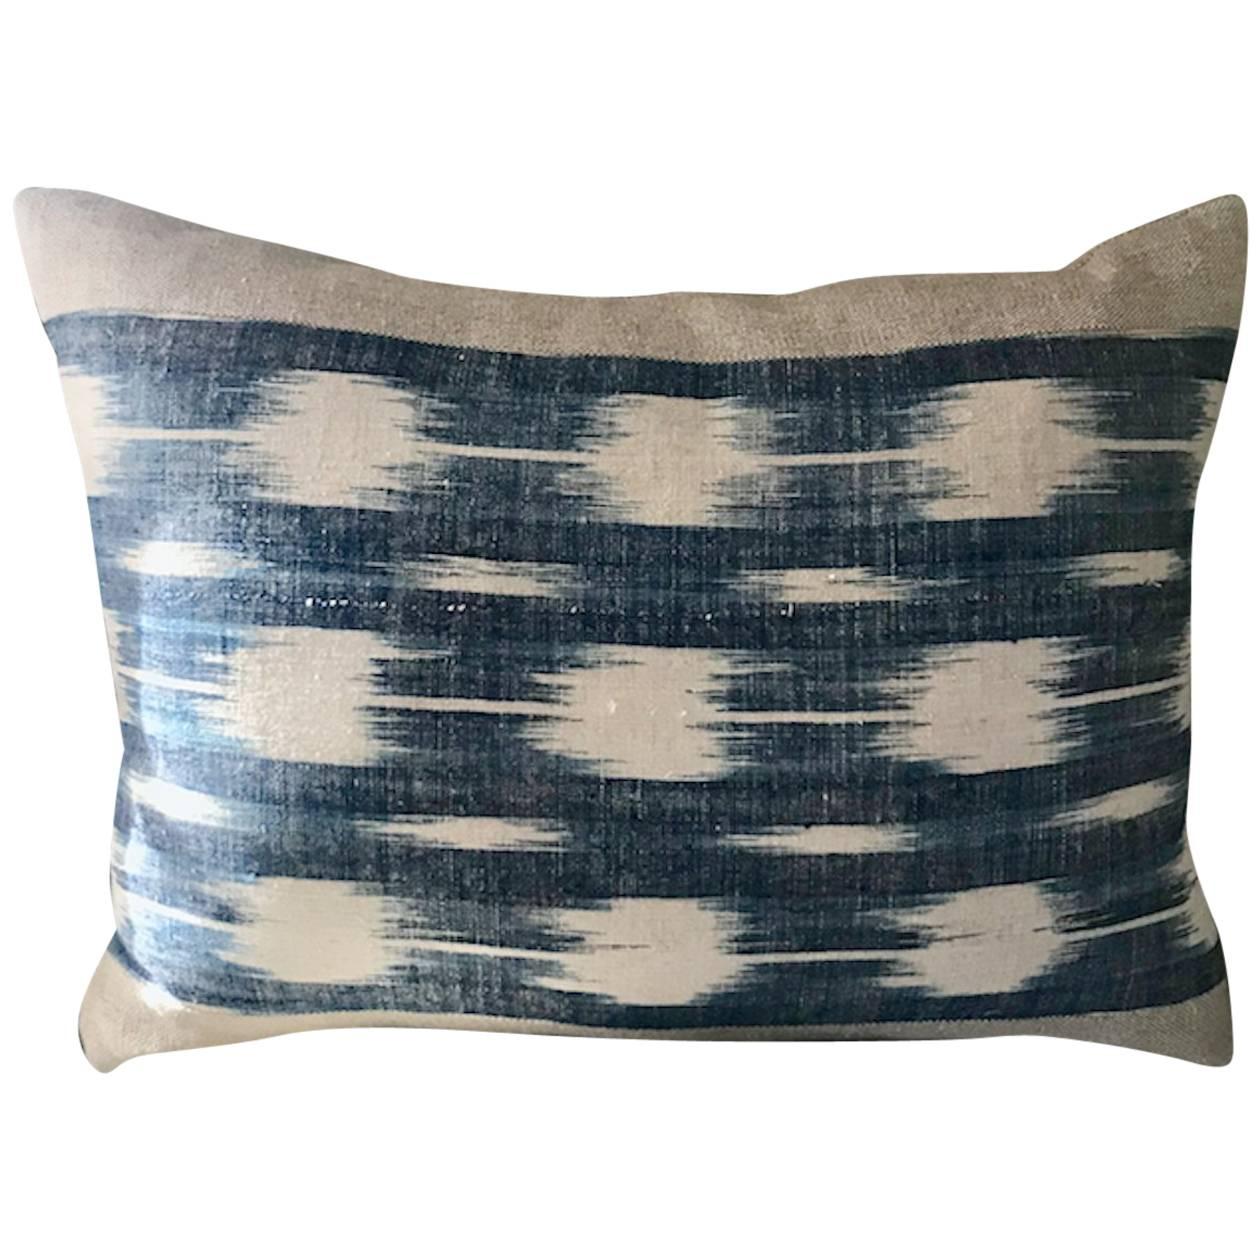 Mid-19th Century French Home Spun Indigo Dyed Ikat Pillow #2 For Sale